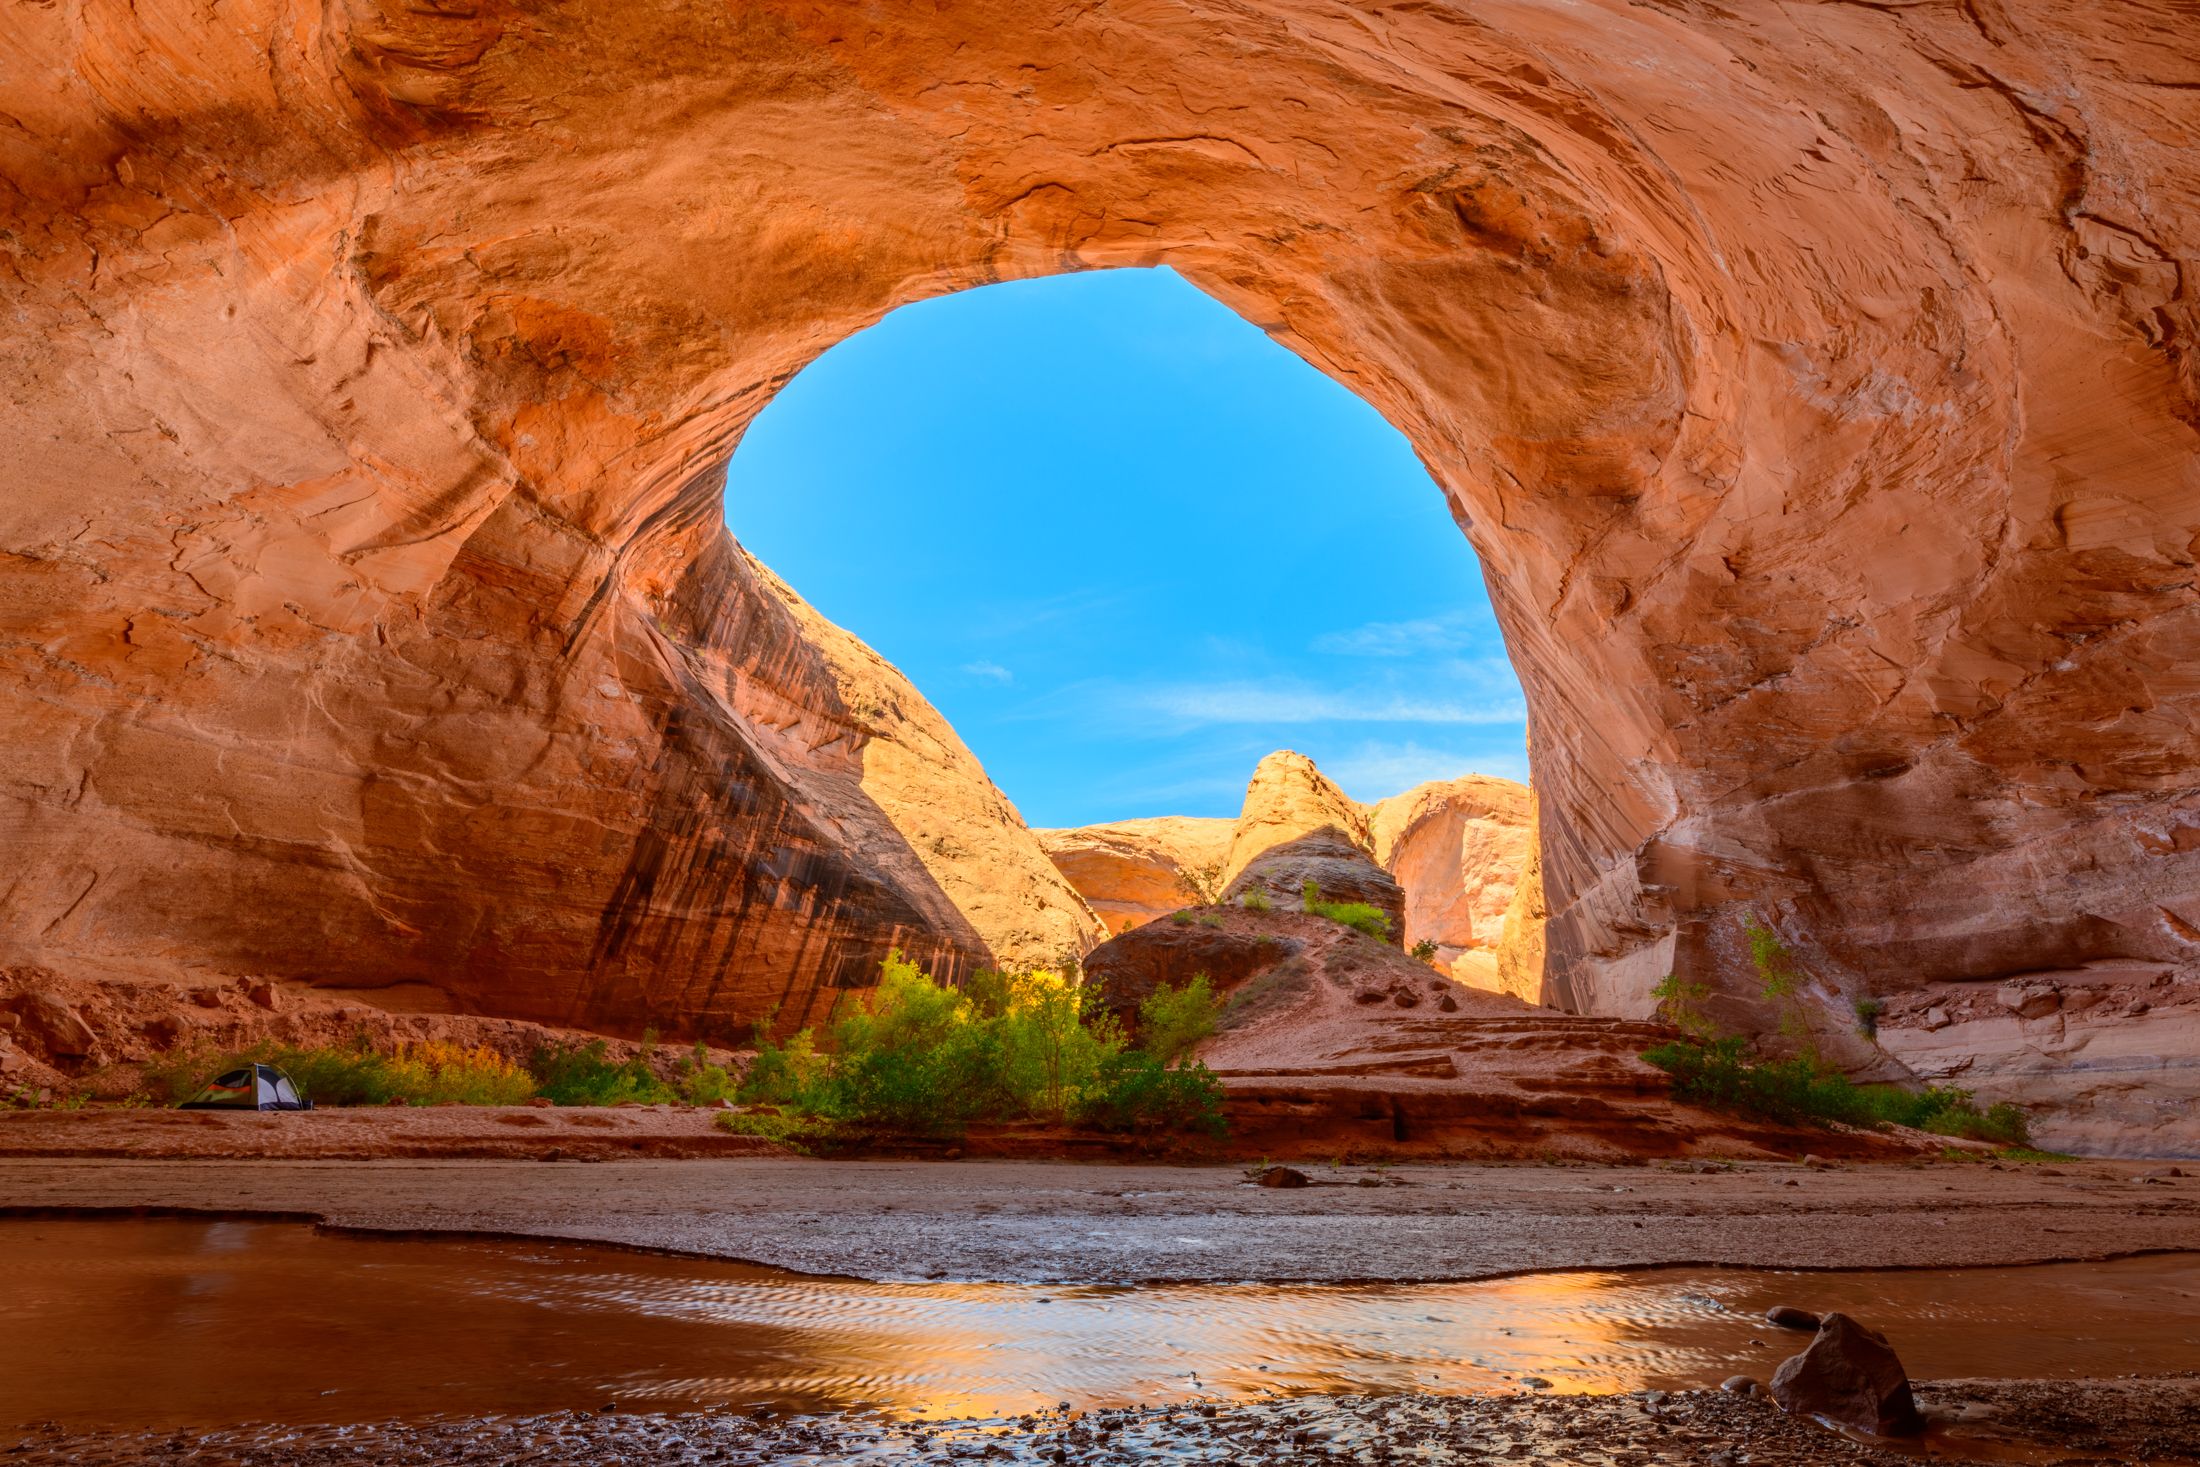 Jeremiah Barber Photography. Coyote Gulch via Sneaker Route